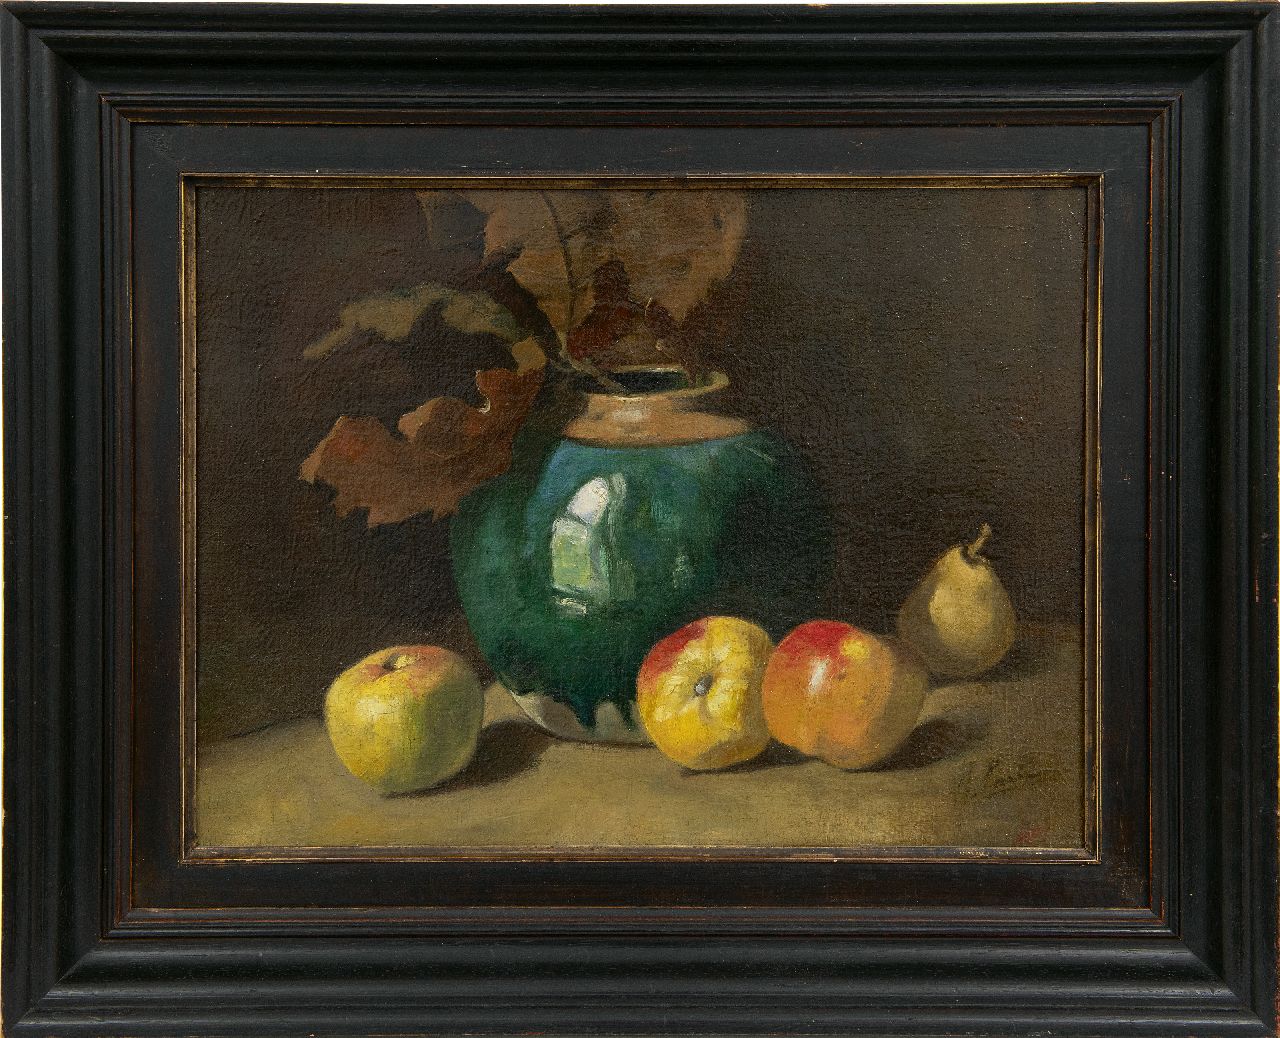 Surie J.  | Jacoba 'Coba' Surie, An autumn still life with a ginger jar and apples, oil on canvas 31.3 x 41.5 cm, signed l.r.